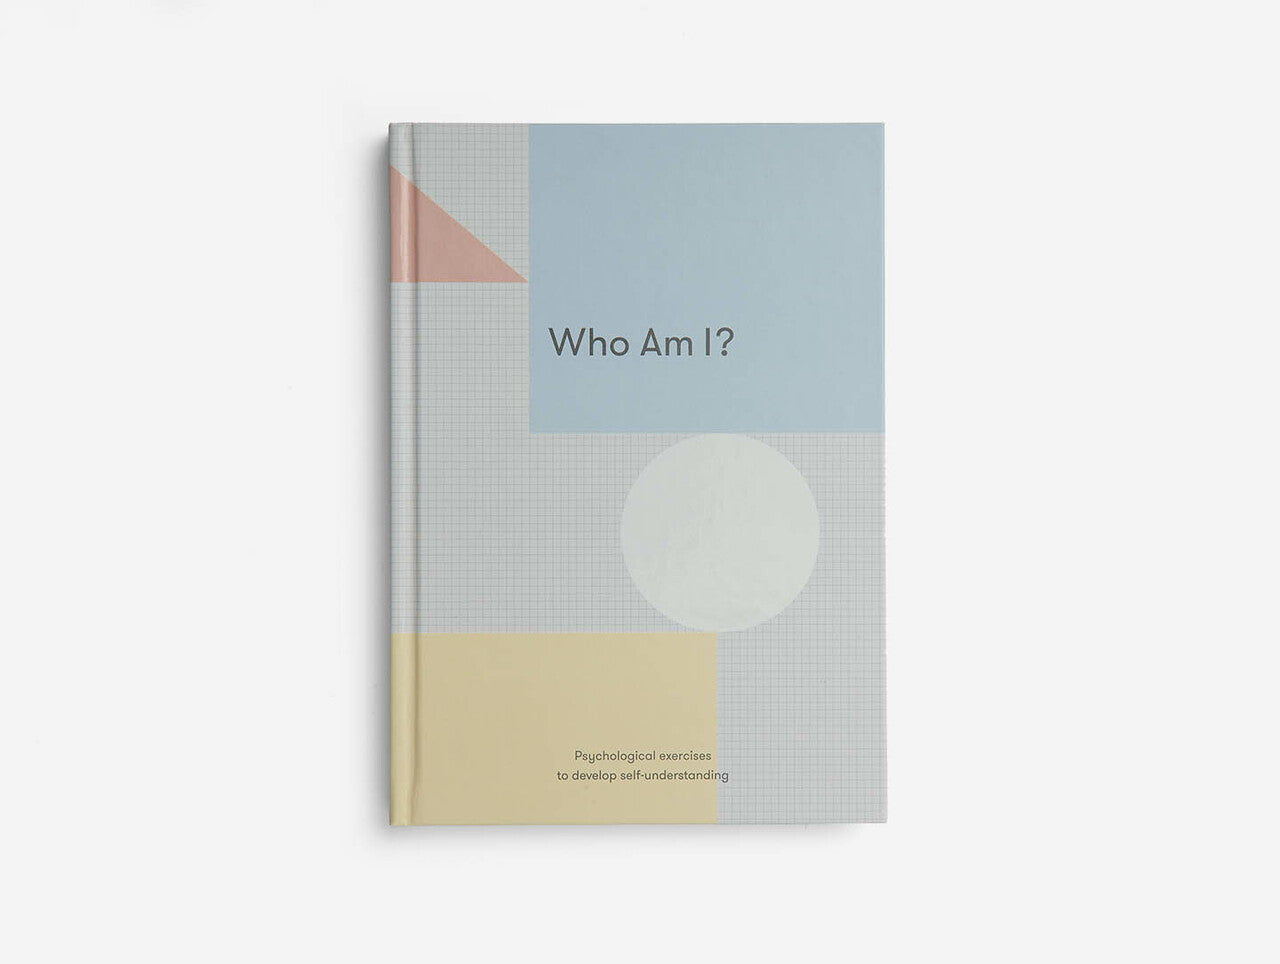 A book with pastel colours and shapes with the title 'Who Am I?'